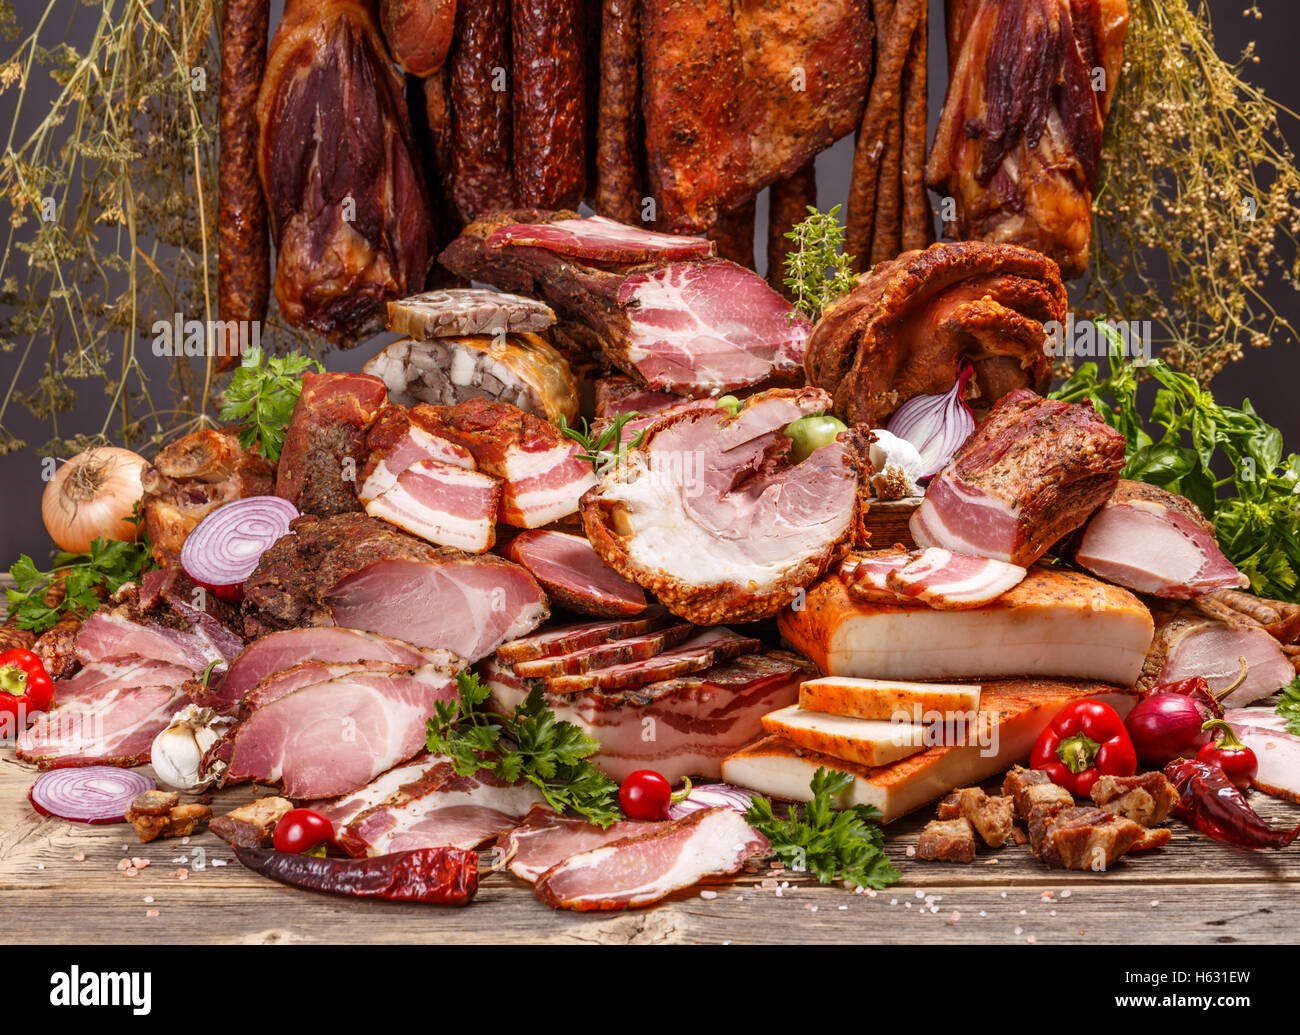 Still life of various pork meat products Stock Photo